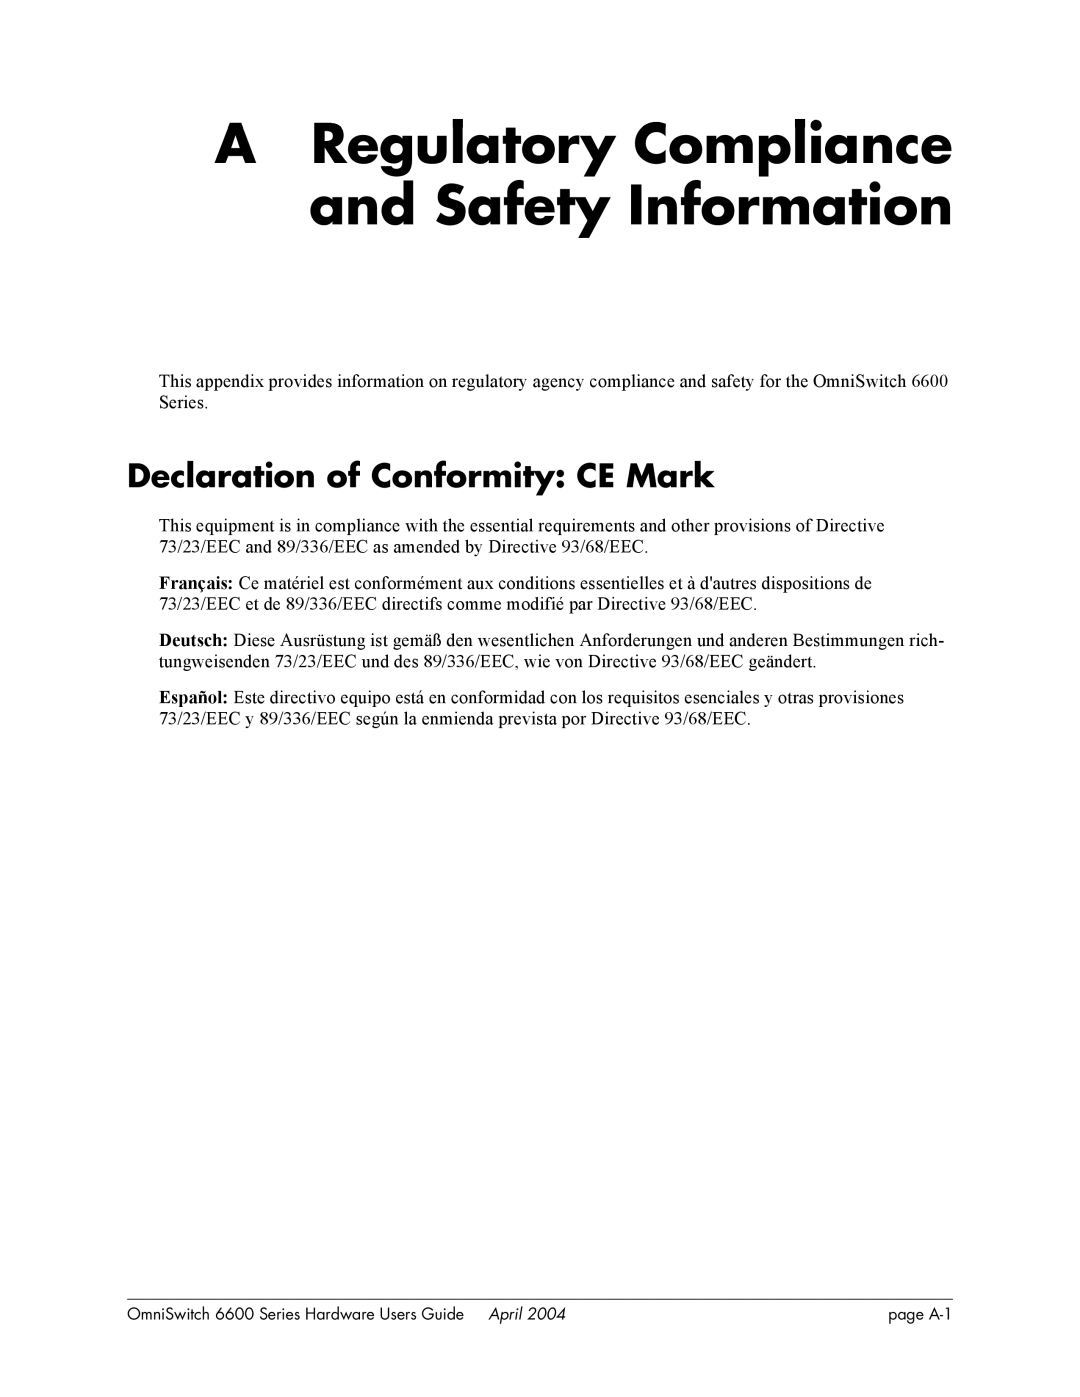 Alcatel-Lucent 6624, 6648, 6600 Series A Regulatory Compliance and Safety Information, Declaration of Conformity CE Mark 